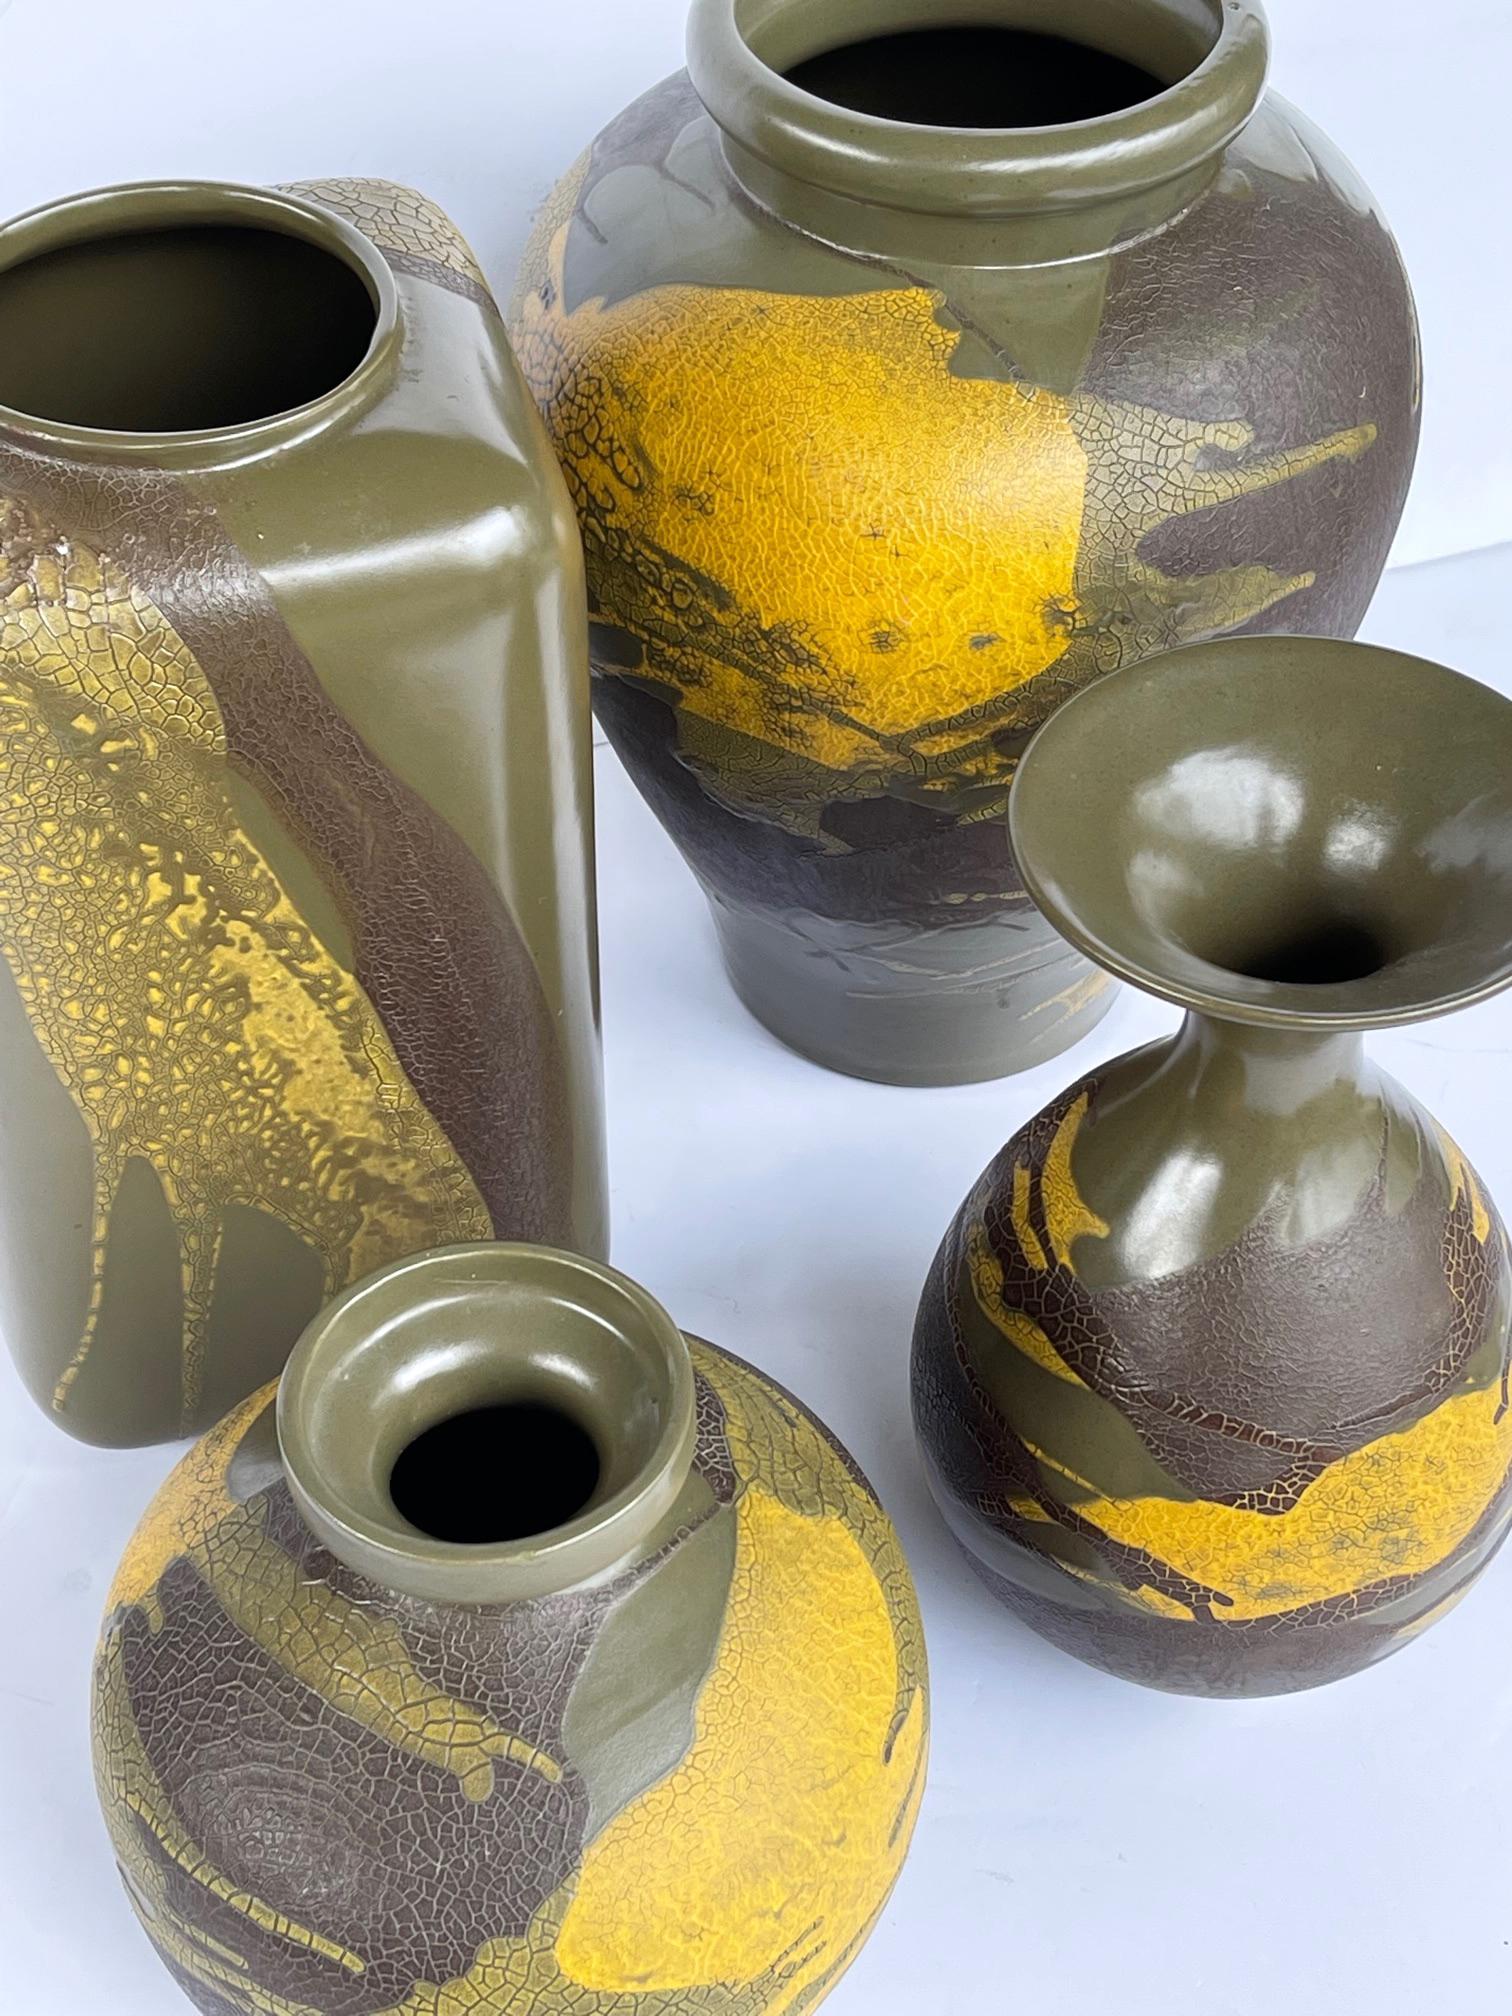 Glazed 4 Royal Haeger Pottery Vessels W Yellow & Brown Drip Glaze on Olive Green Ground